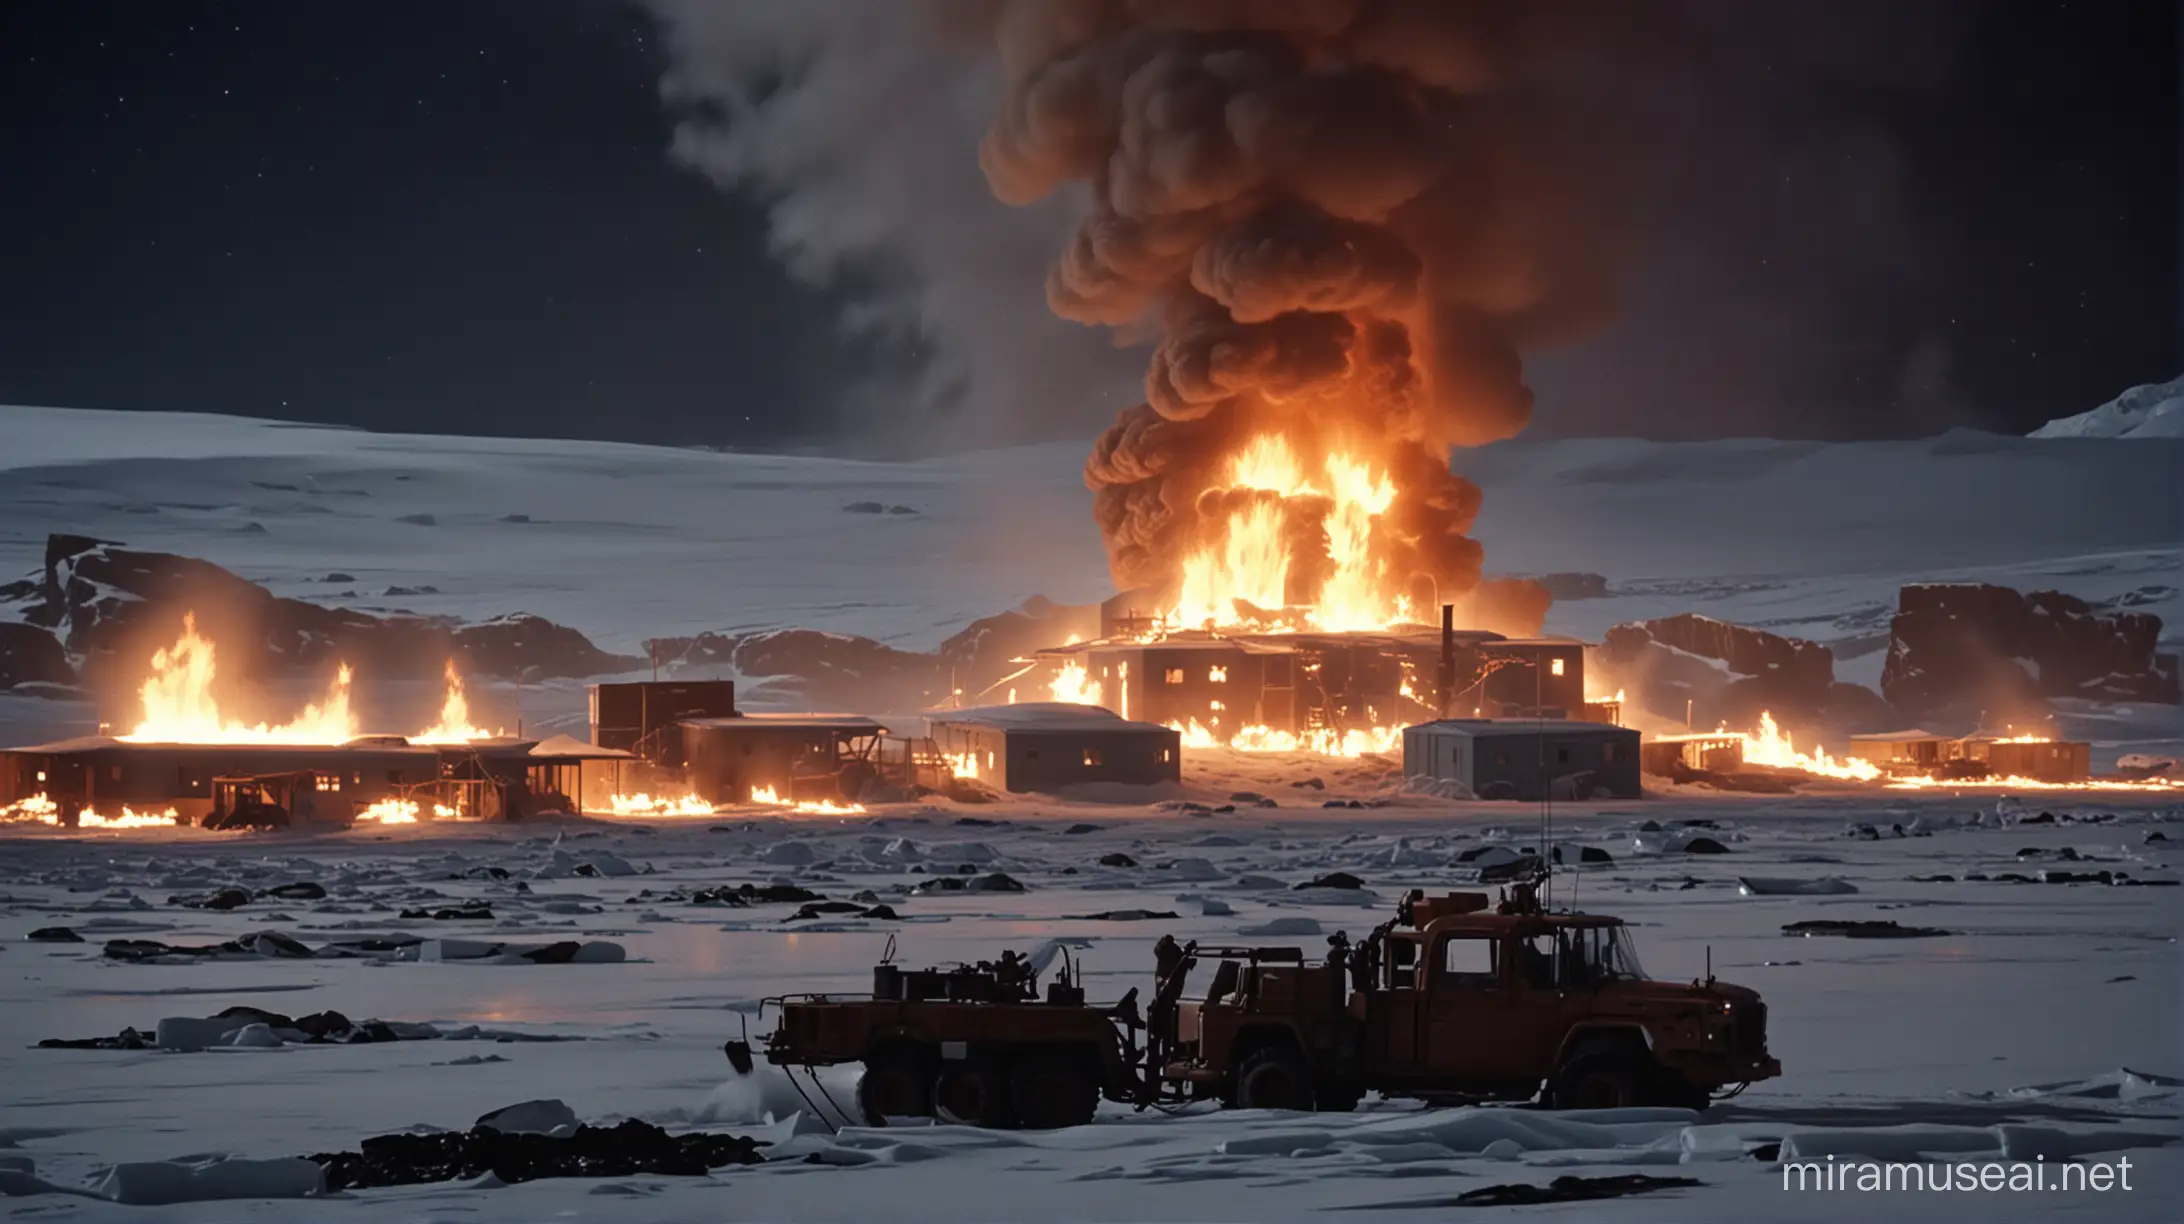 cinematic still, film by john carpenter, the thing, antarctica, night, buildings on fire in background